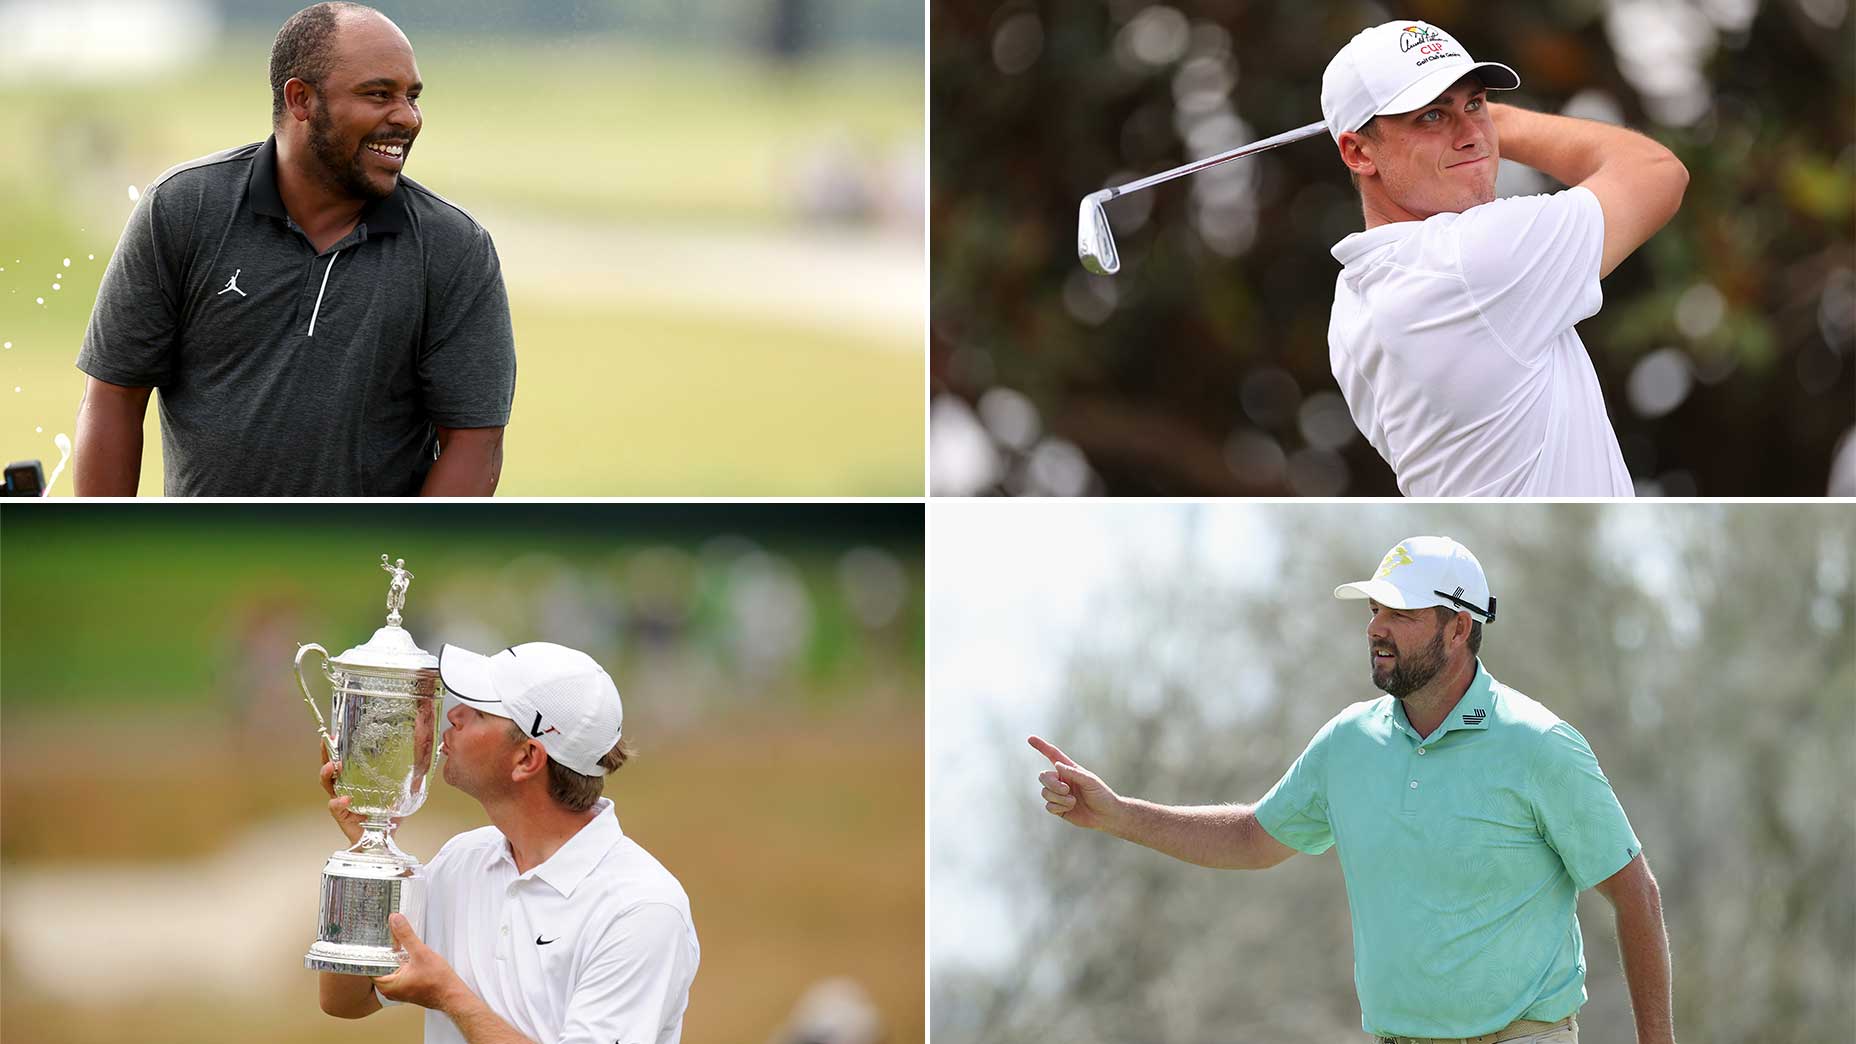 These golfers will not play in the U.S. Open.